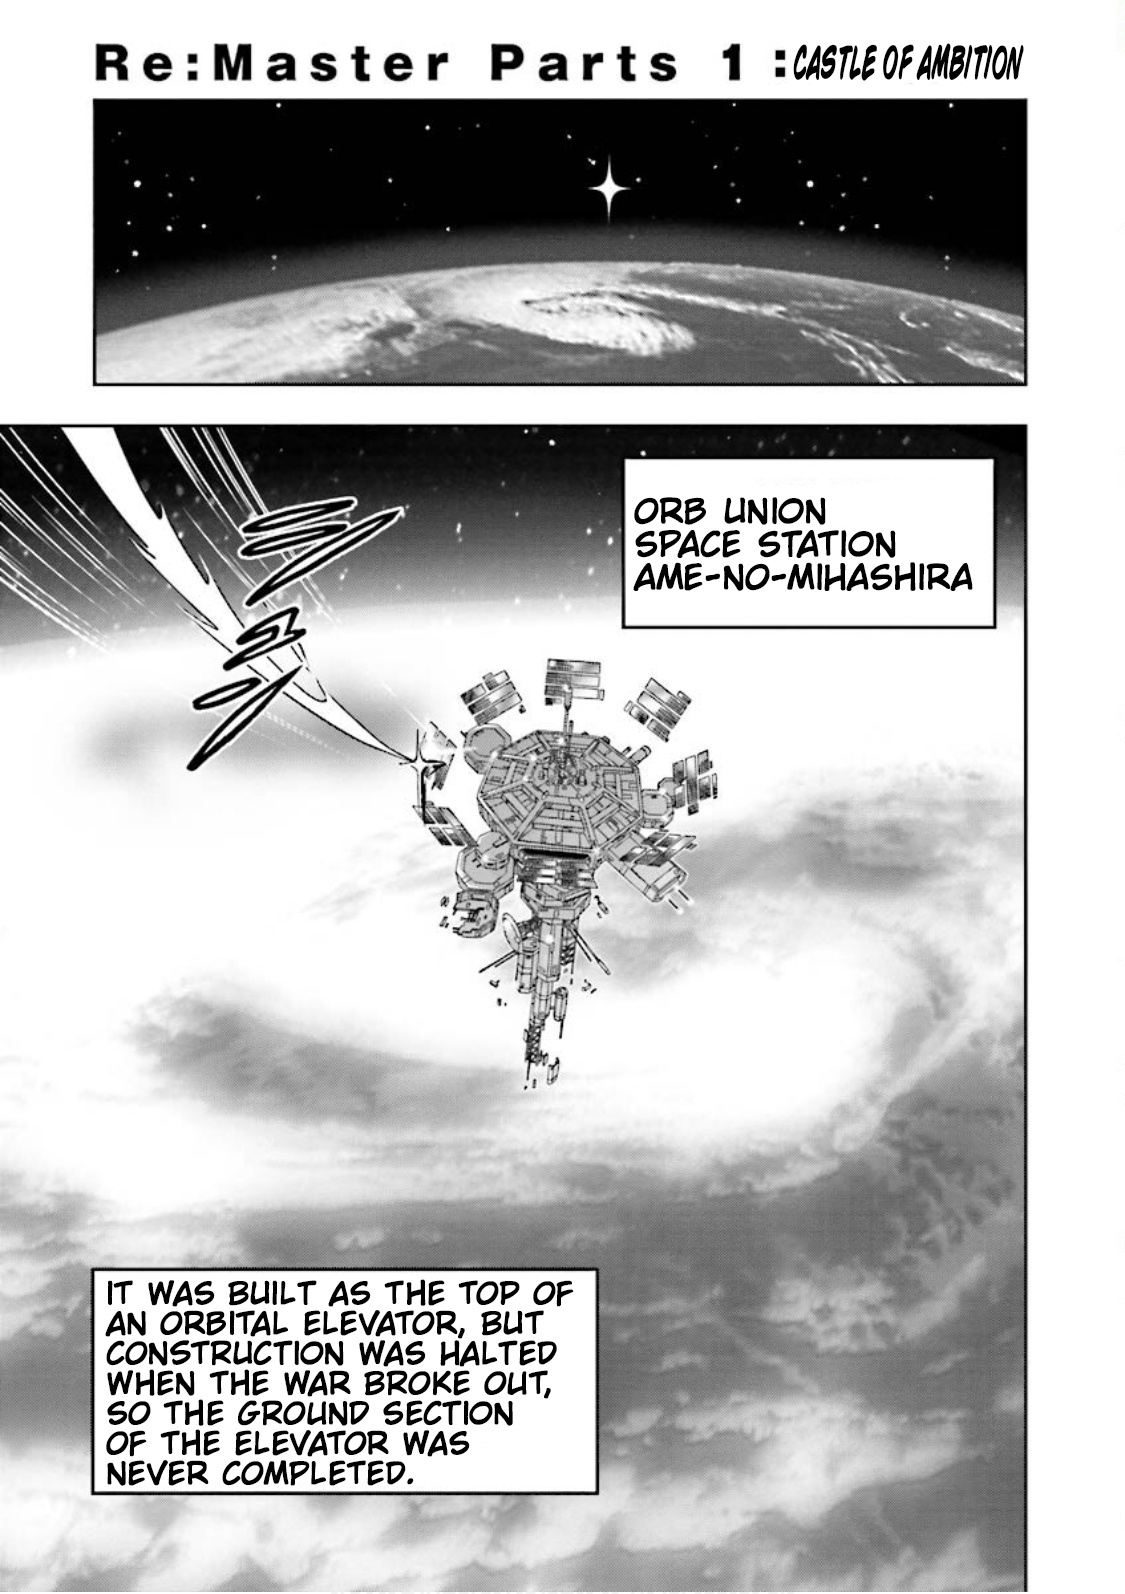 Mobile Suit Gundam Seed Astray Re:master Edition Vol.1 Chapter 5.5: Re:master Parts 1: Castle Of Ambition - Picture 1